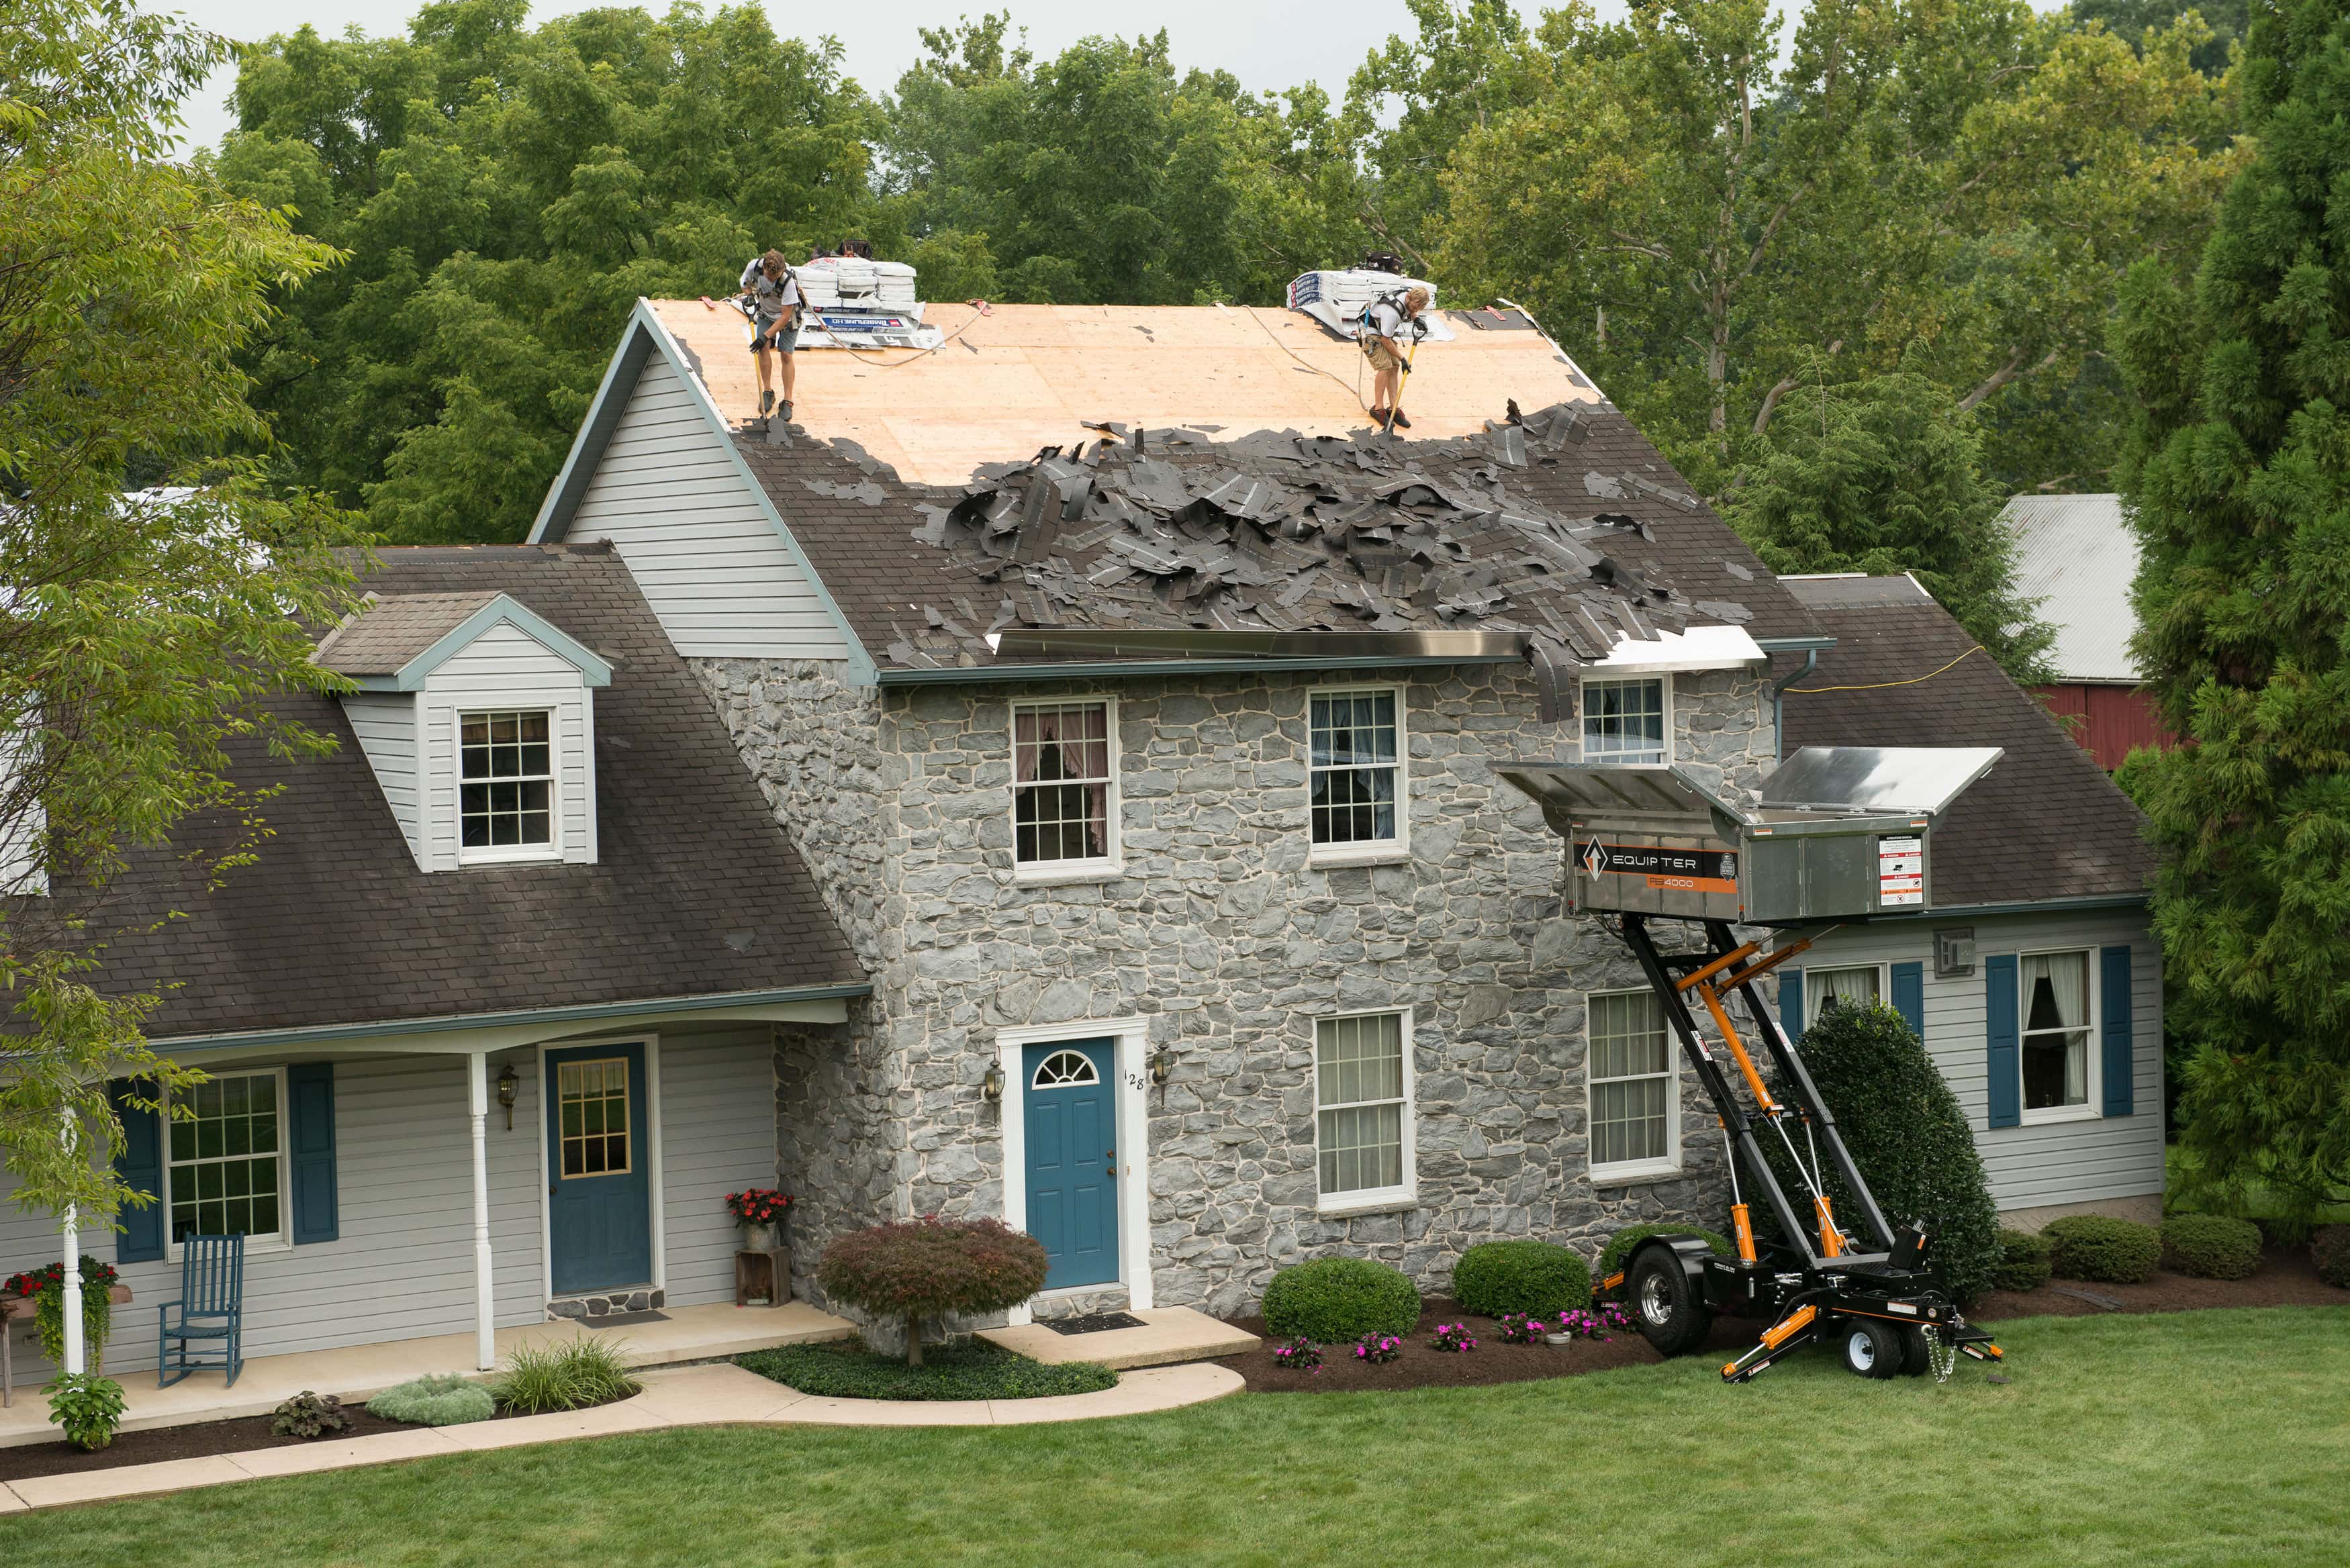 A and A Quality Roofing - West Plains, MO, US, roofing business